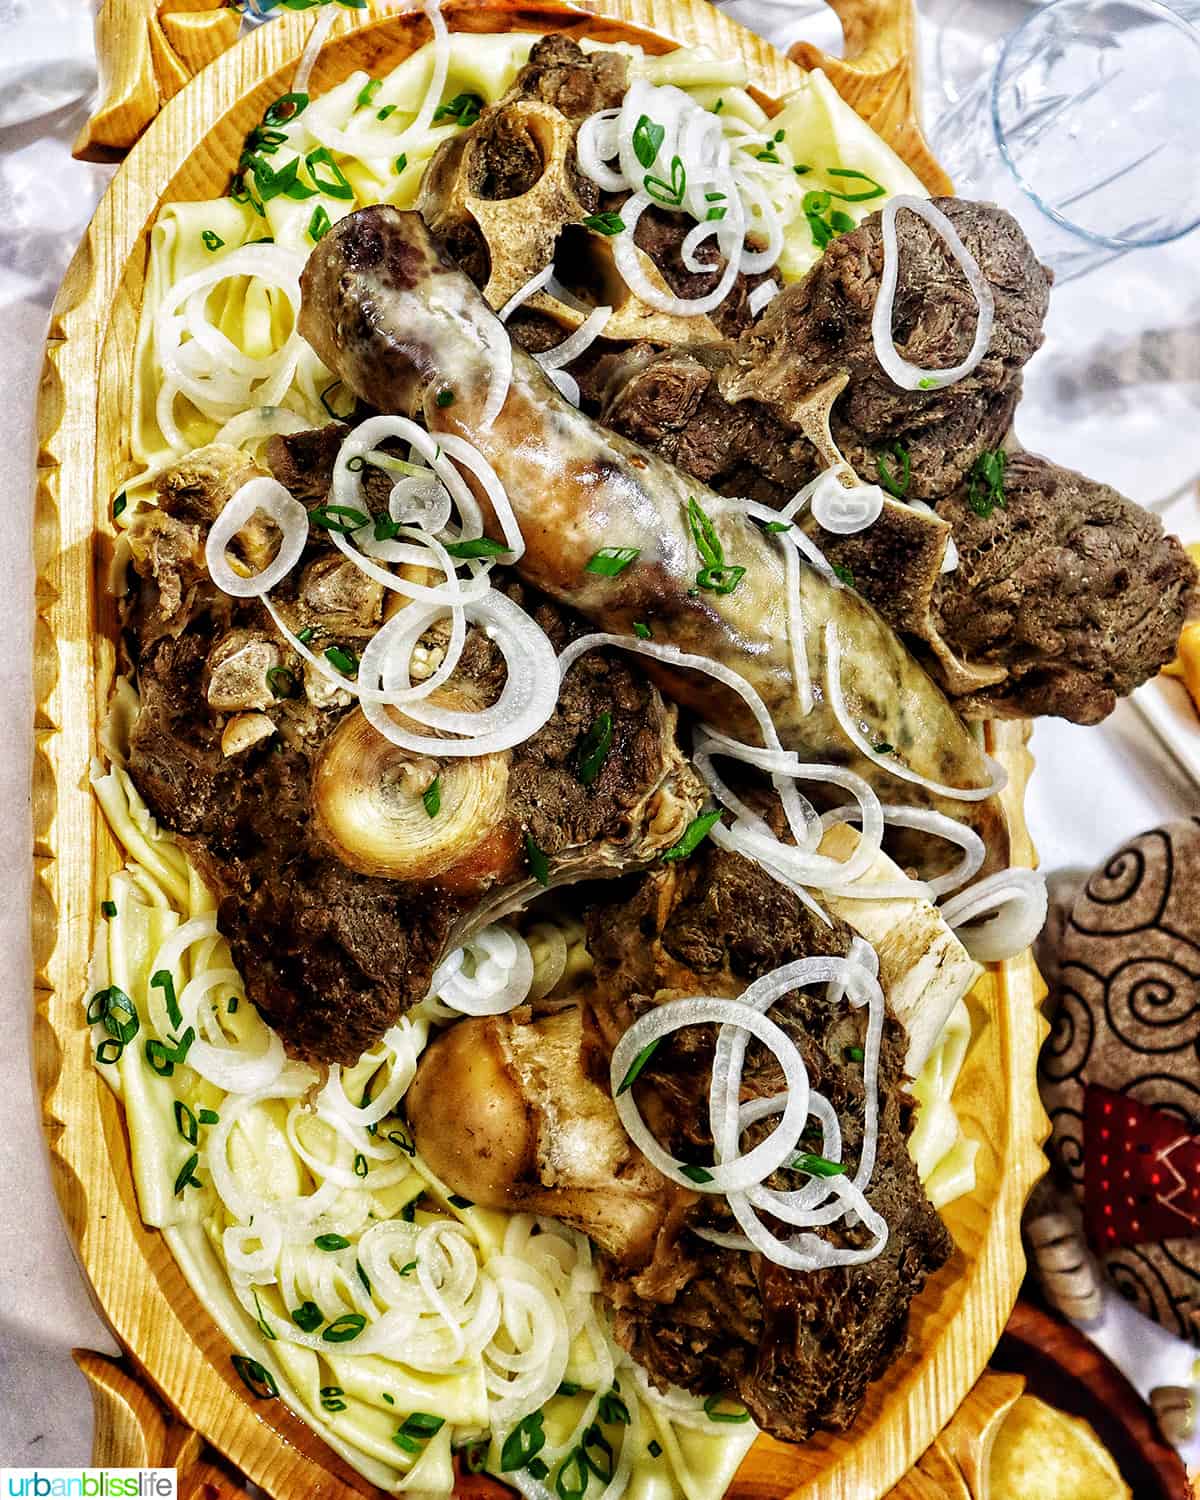 beshbarmak, top Kazakhstan food of horse meat and beef with noodles and onions.